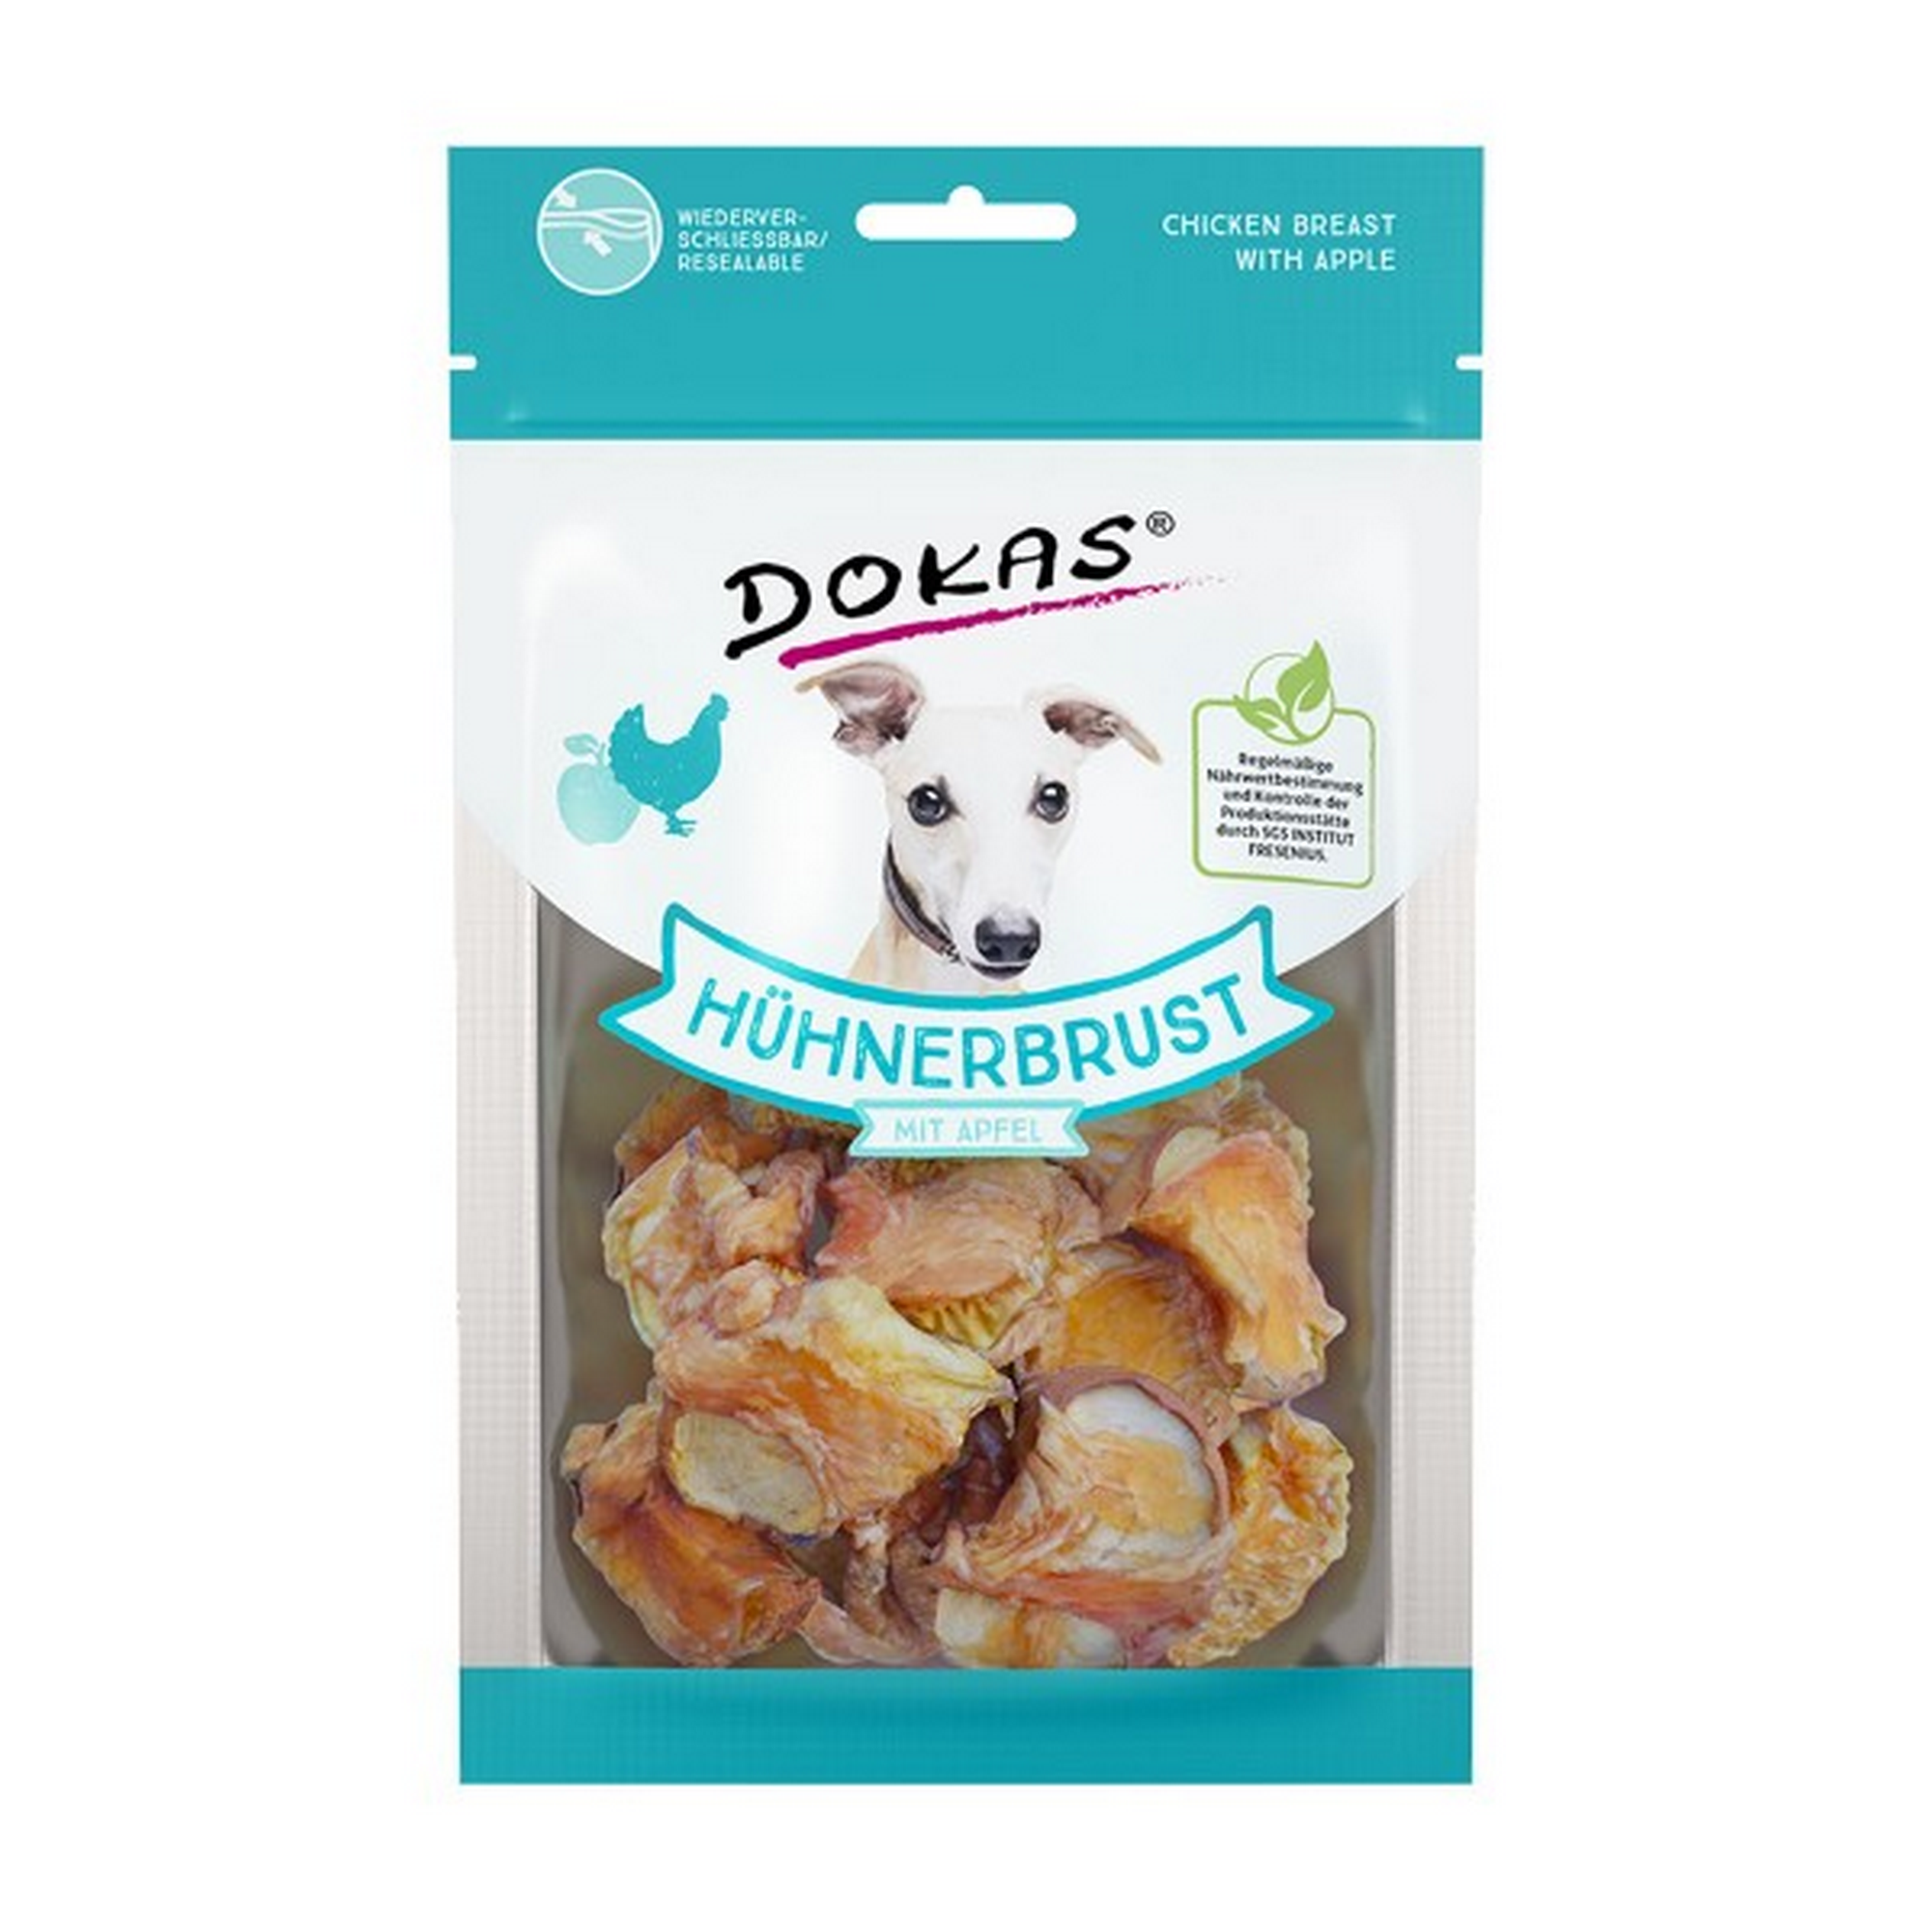 Hundesnack Hühnerbrust mit Apfel 70 g + product picture